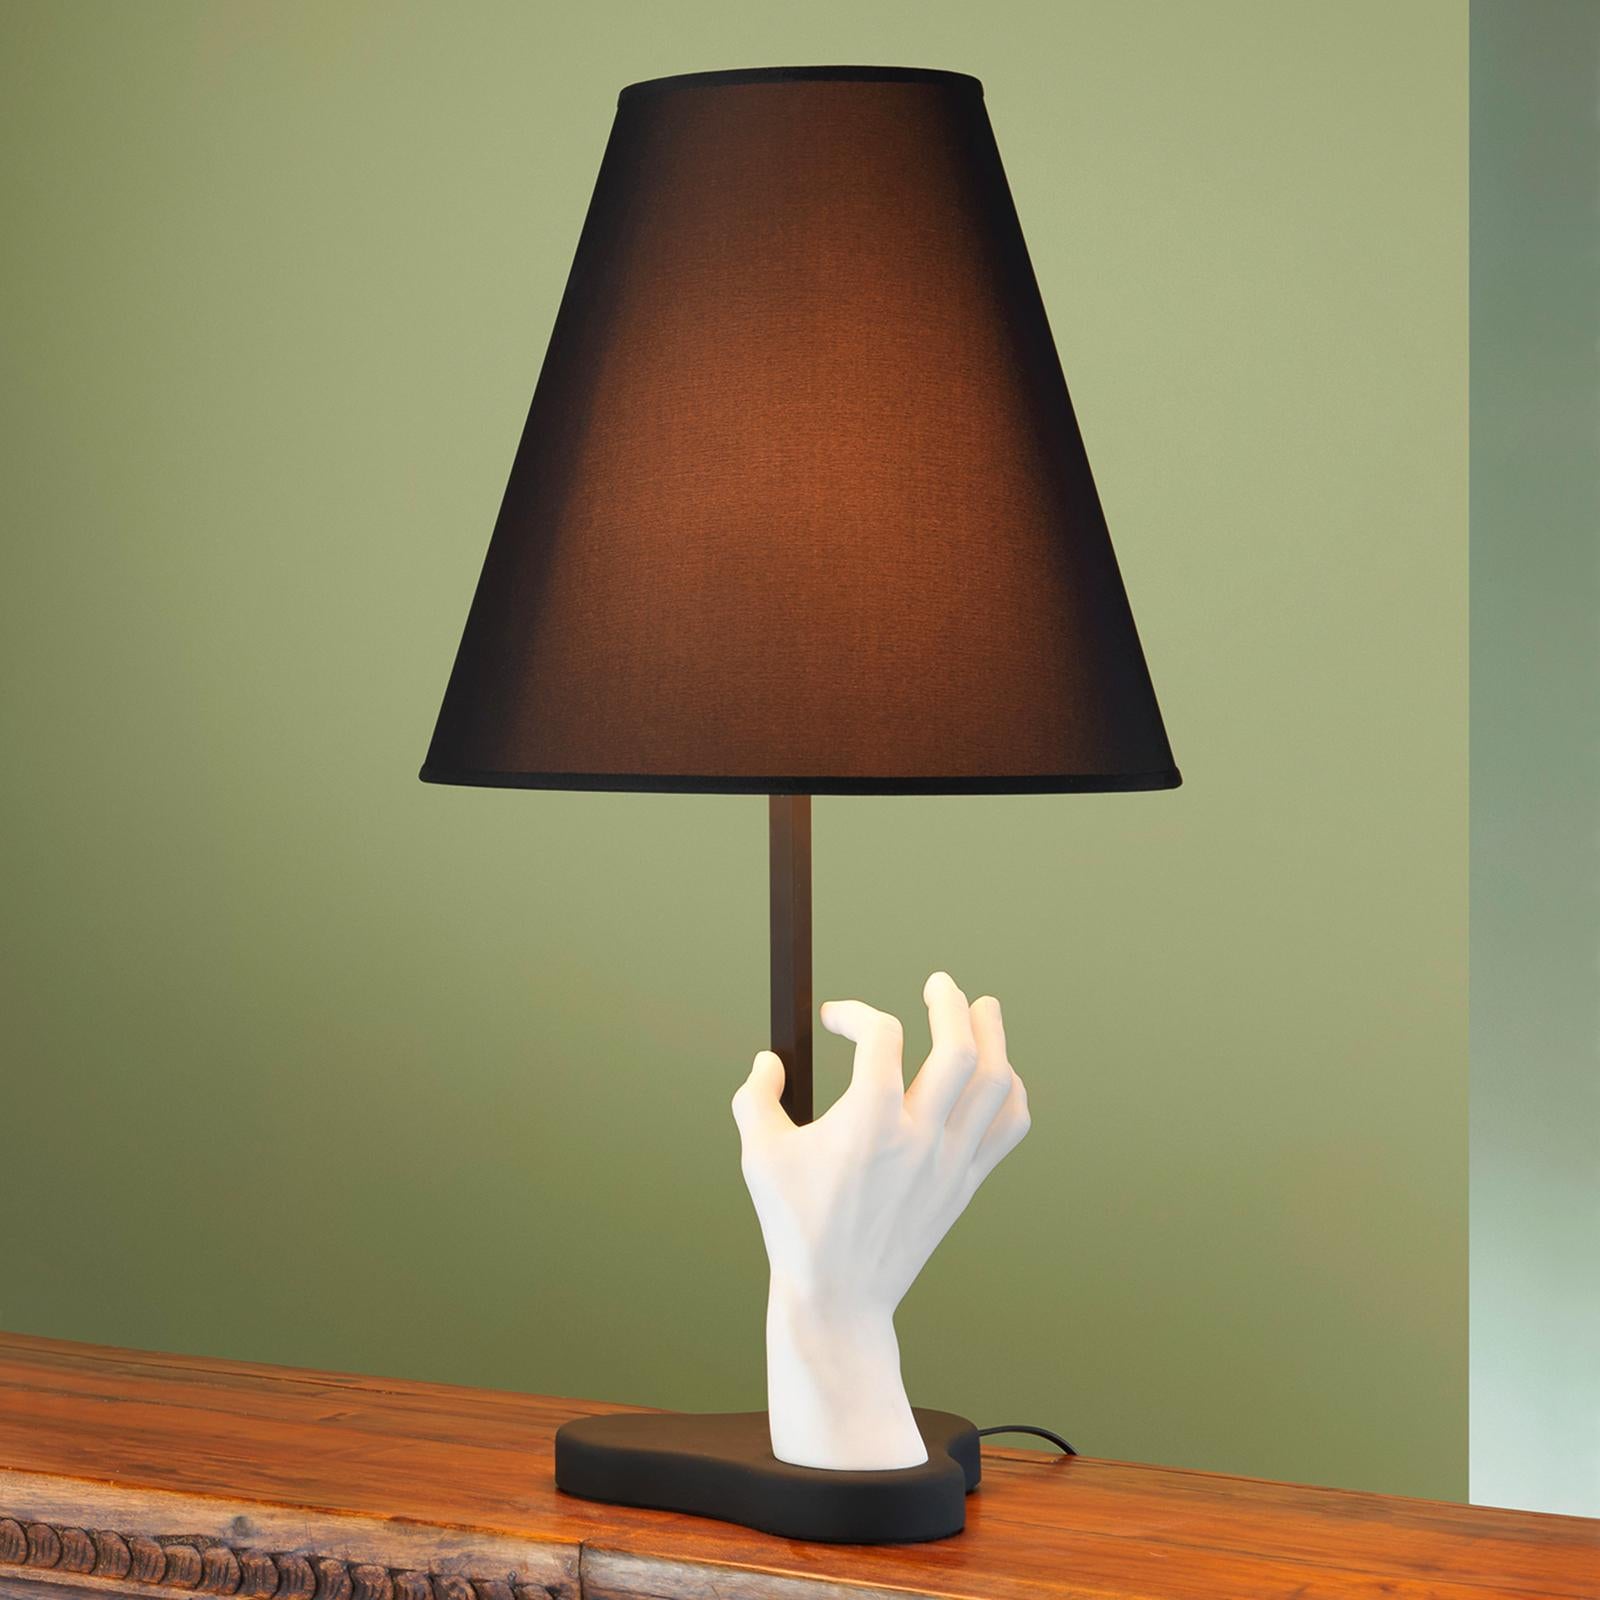 Table lamp handy with casted white hand sculpture
in powdered marble and resin and blackened base in
metal in matte finish. With shade in black fabric lined
with white PVC. With 1 bulb, lamp holder type E27, max
70 watt, bulb not included.